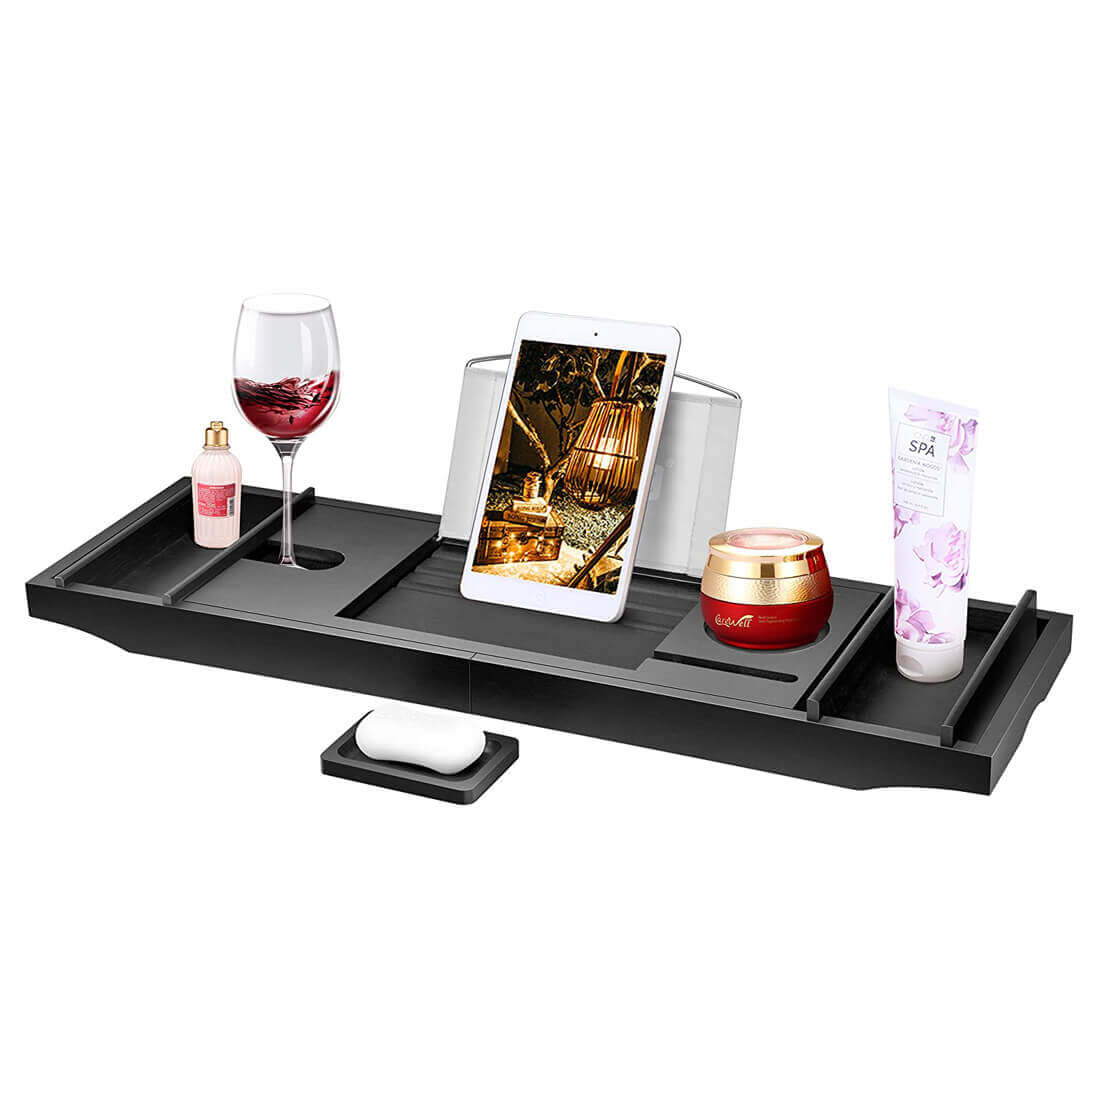 VIVOHOME Expandable 43 Inch Bamboo Bathtub Caddy Tray with Smartphone Tablet Book Holders, Soap Tray, Wine Glass Slot, Black